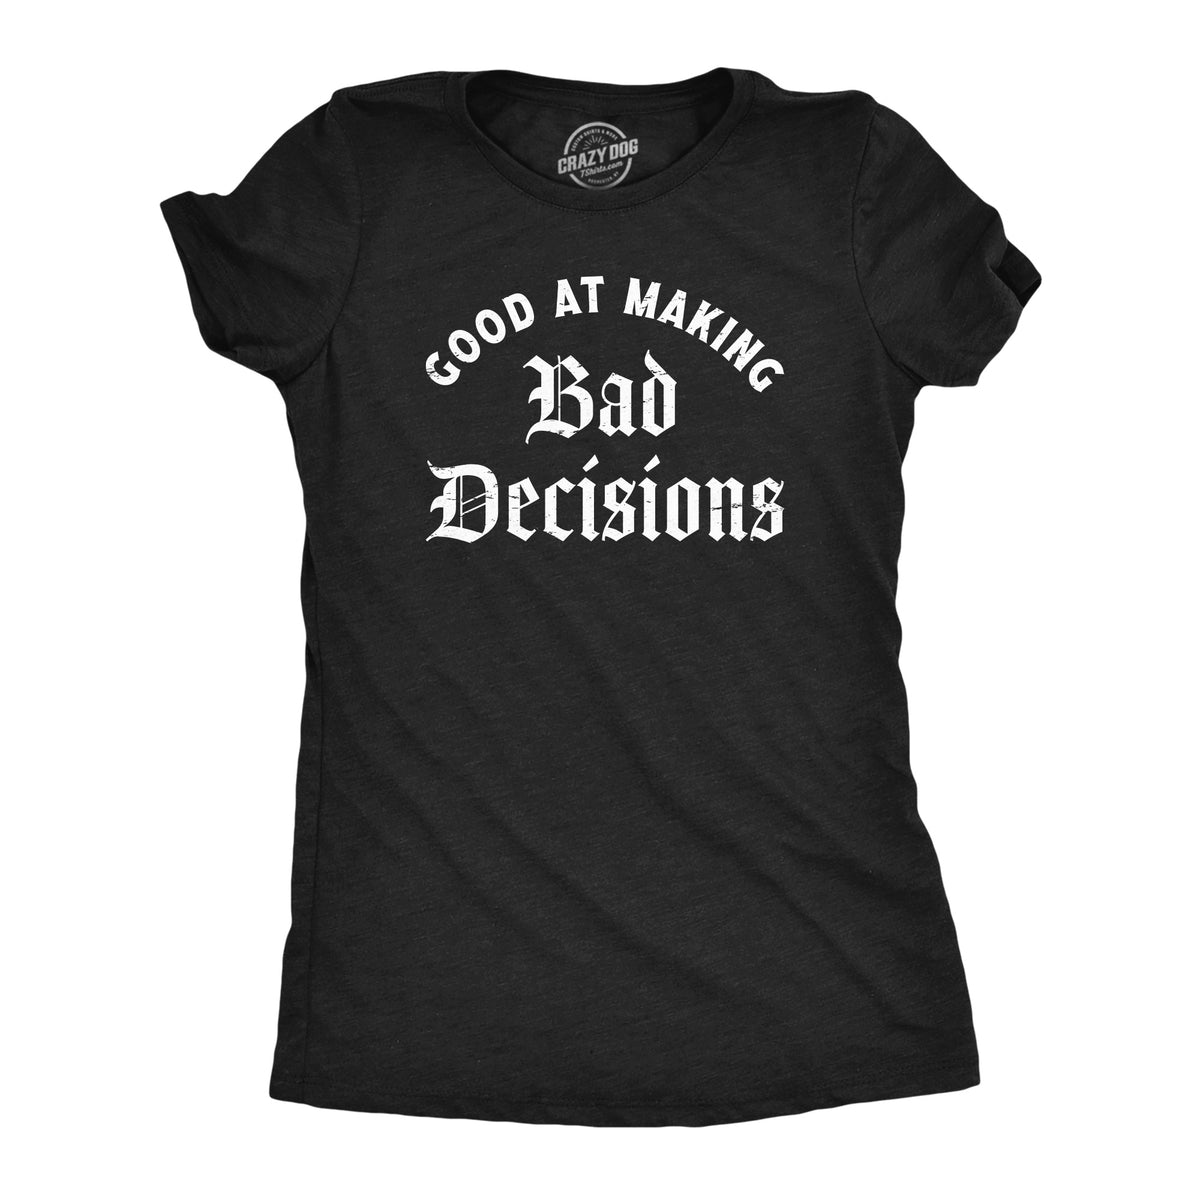 Funny Heather Black - BAD Good At Making Bad Decisions Womens T Shirt Nerdy Sarcastic Tee